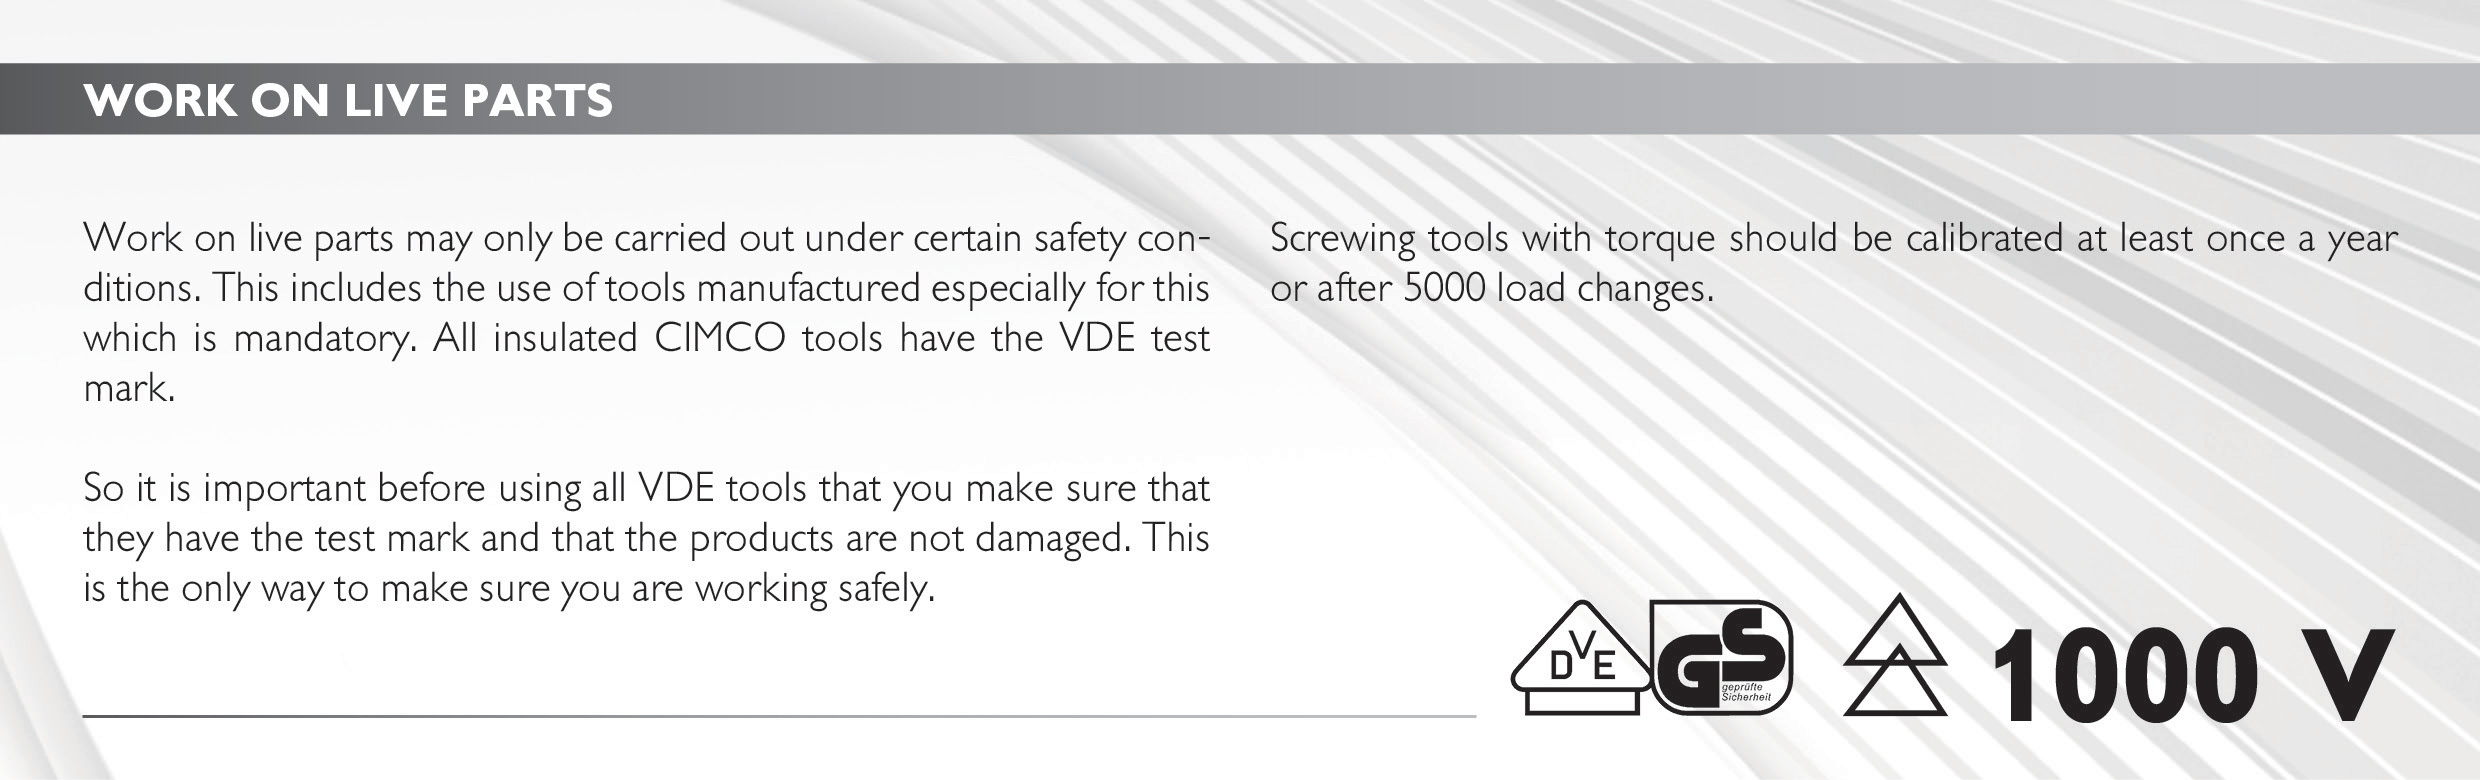 Work on live parts
Work on live parts may only be carried out under certain safety conditions. This includes the use of tools manufactured especially for this which is mandatory. All insulated CIMCO tools have the VDE test mark.
So it is important before using all VDE tools that you make sure that they have the test mark and that the products are not damaged. This is the only way to make sure you are working safely. 
Screwing tools with torque should be calibrated at least once a year or after 5000 load changes. 